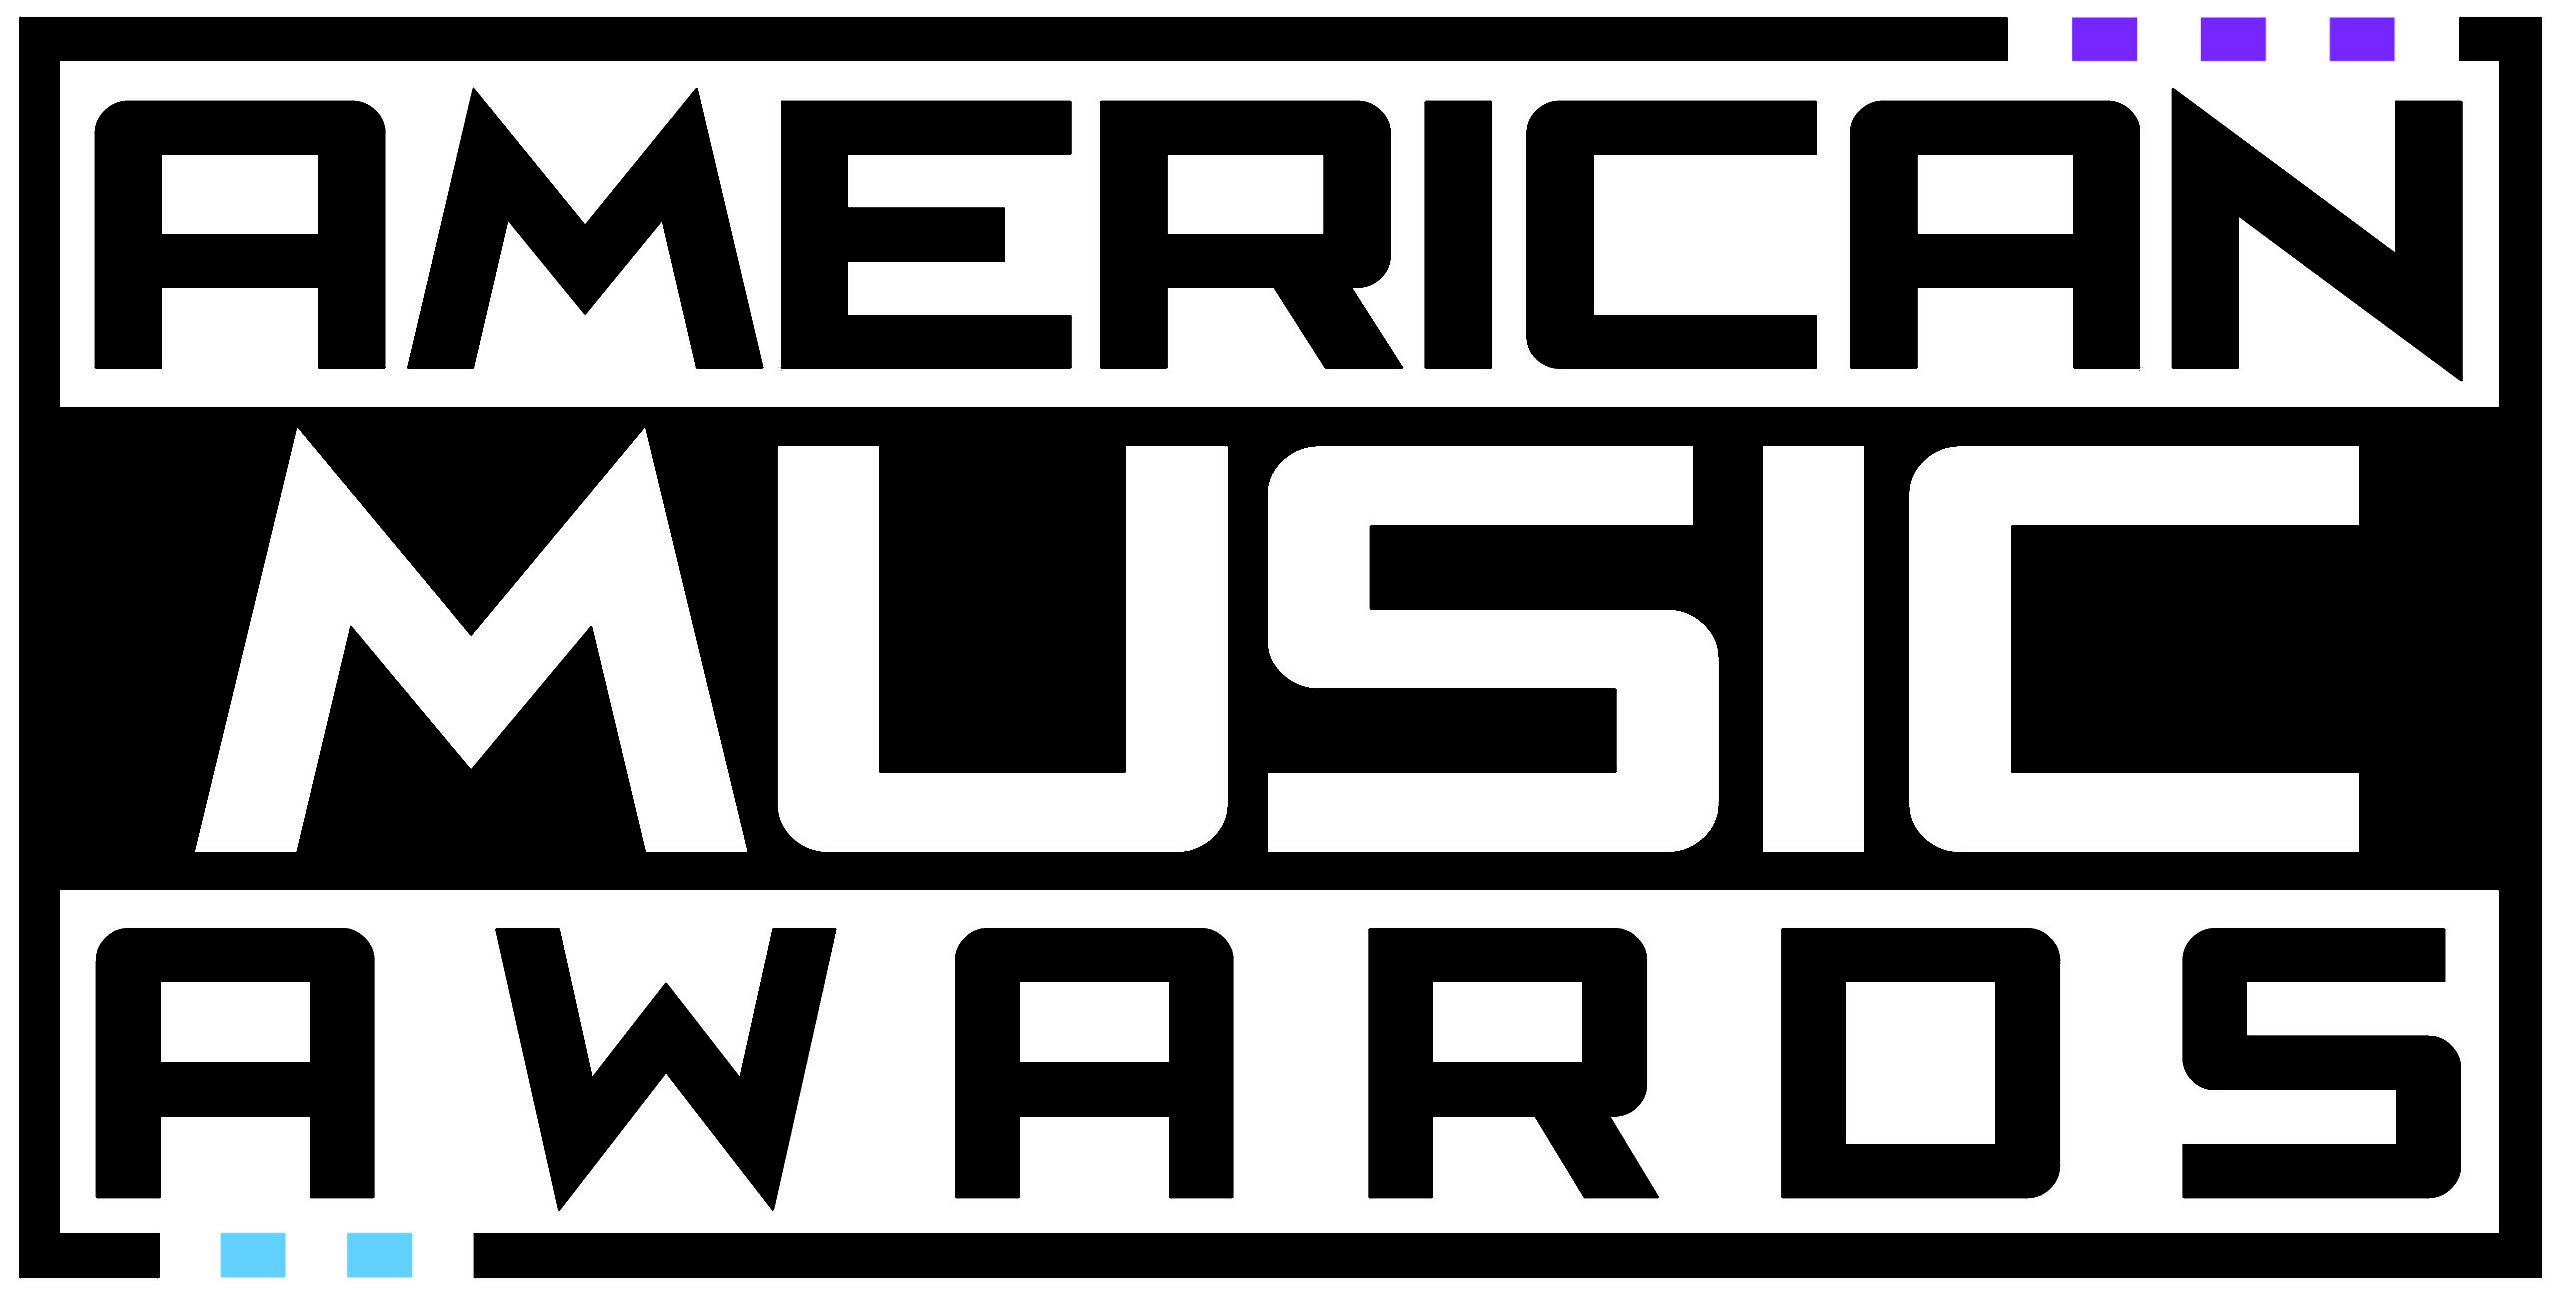 Watch 2014 American Music Awards Live Performances (Video)